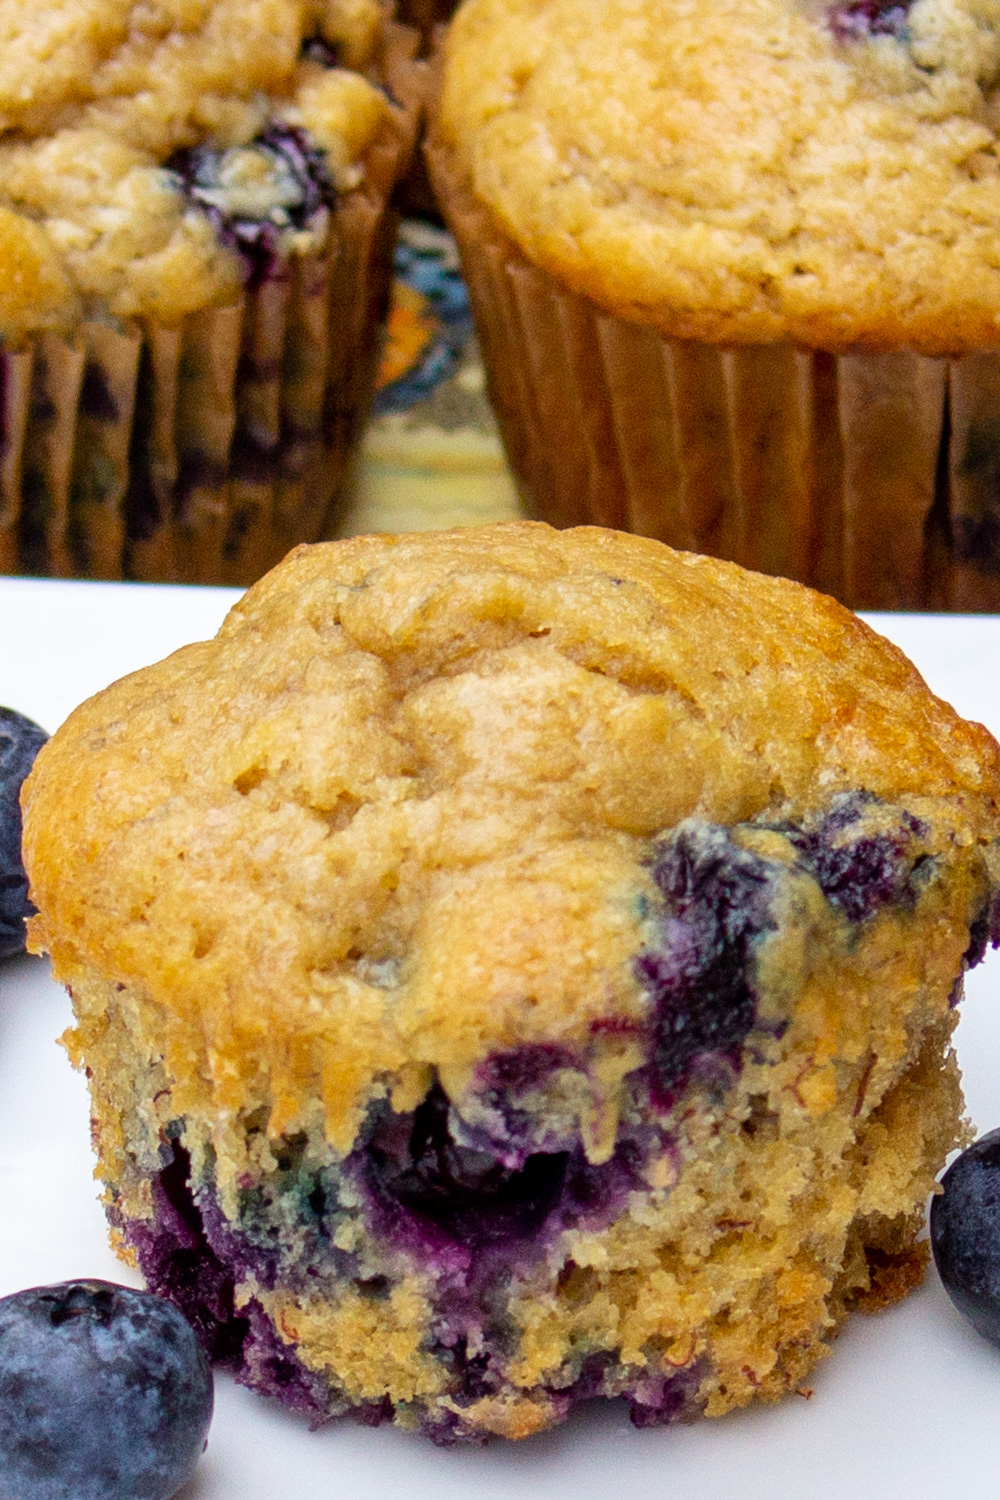 one banana blueberry muffin on plate with more muffins behind